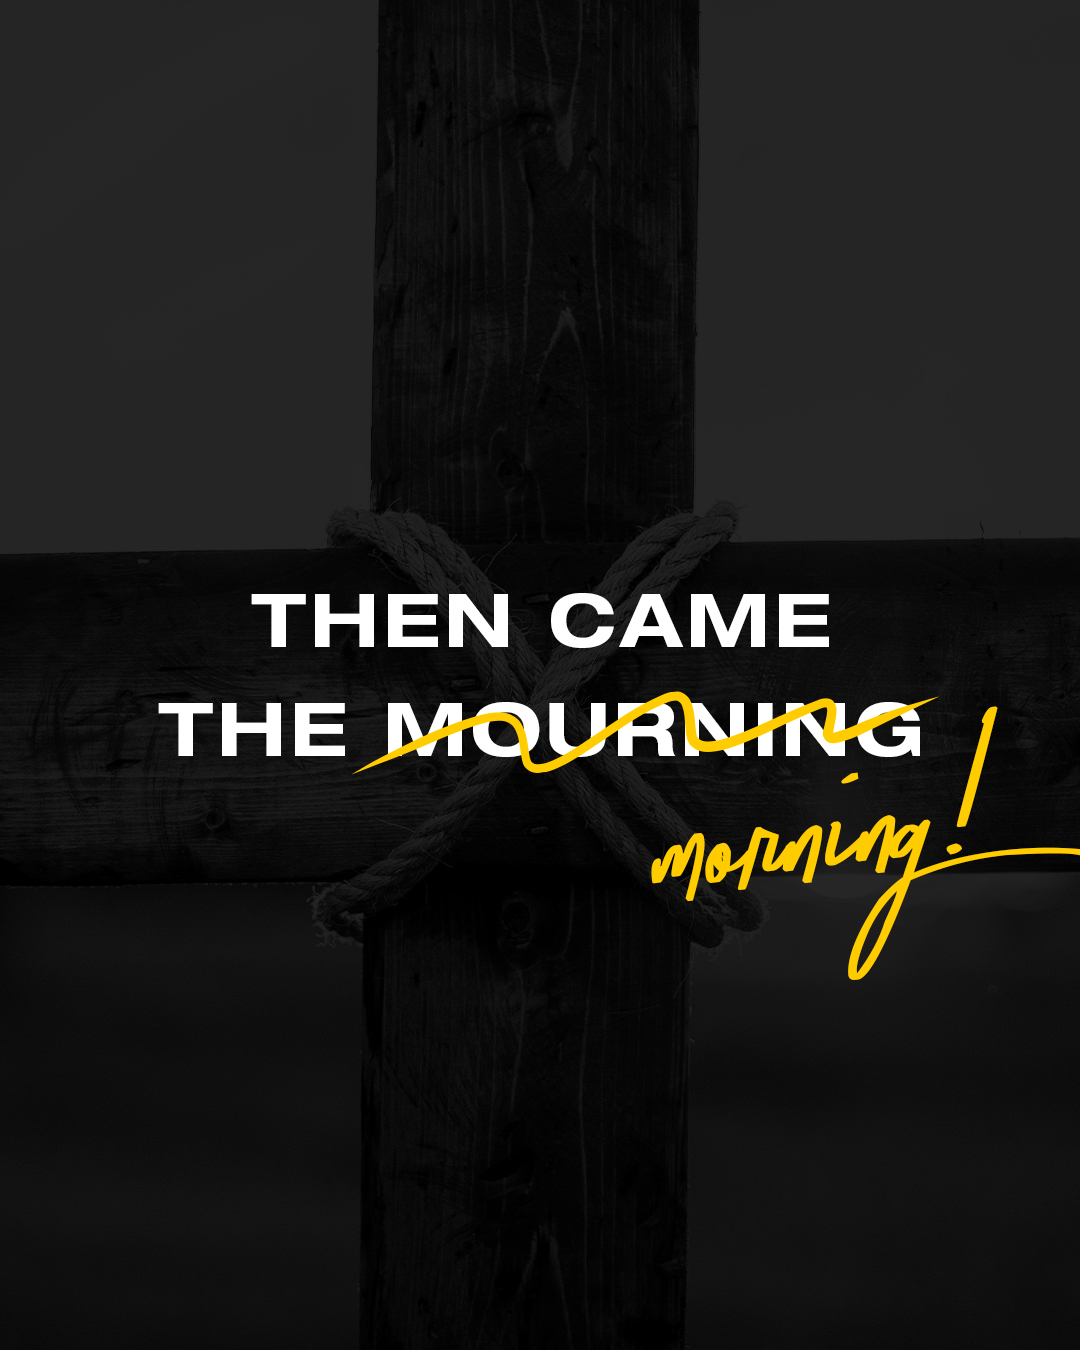 Then came the mourning/morning